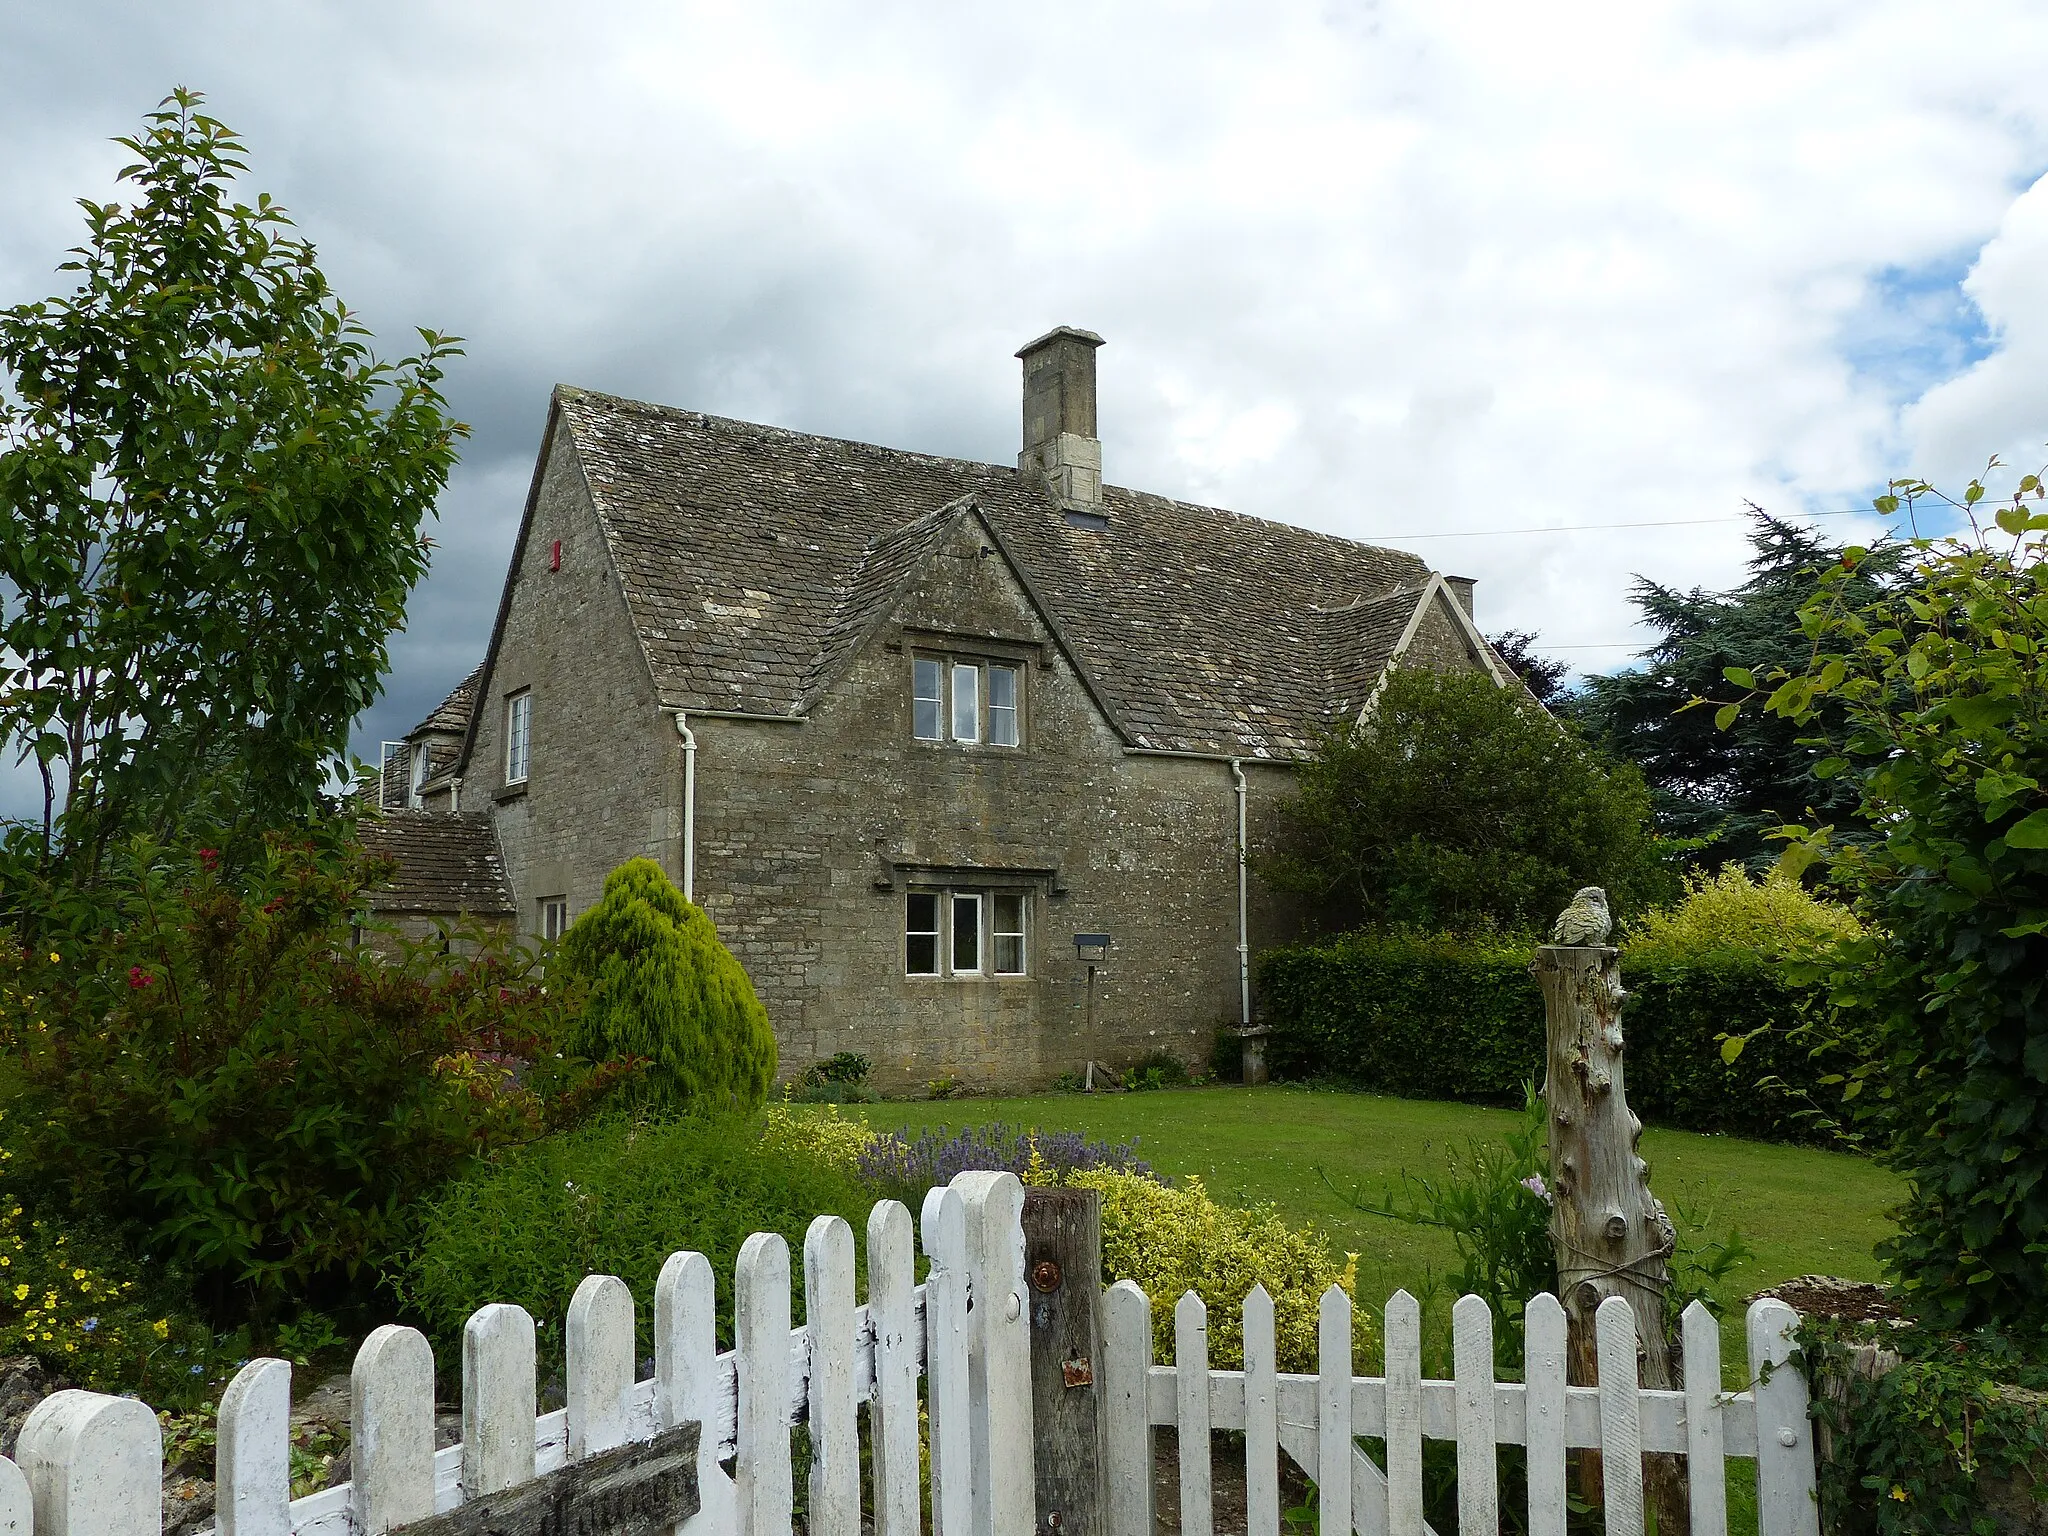 Photo showing: Cotswold Cottage: Grade II listed house in Birdlip, Gloucestershire, UK. Wikidata has entry Cotswold Cottage (Q26591565) with data related to this item.